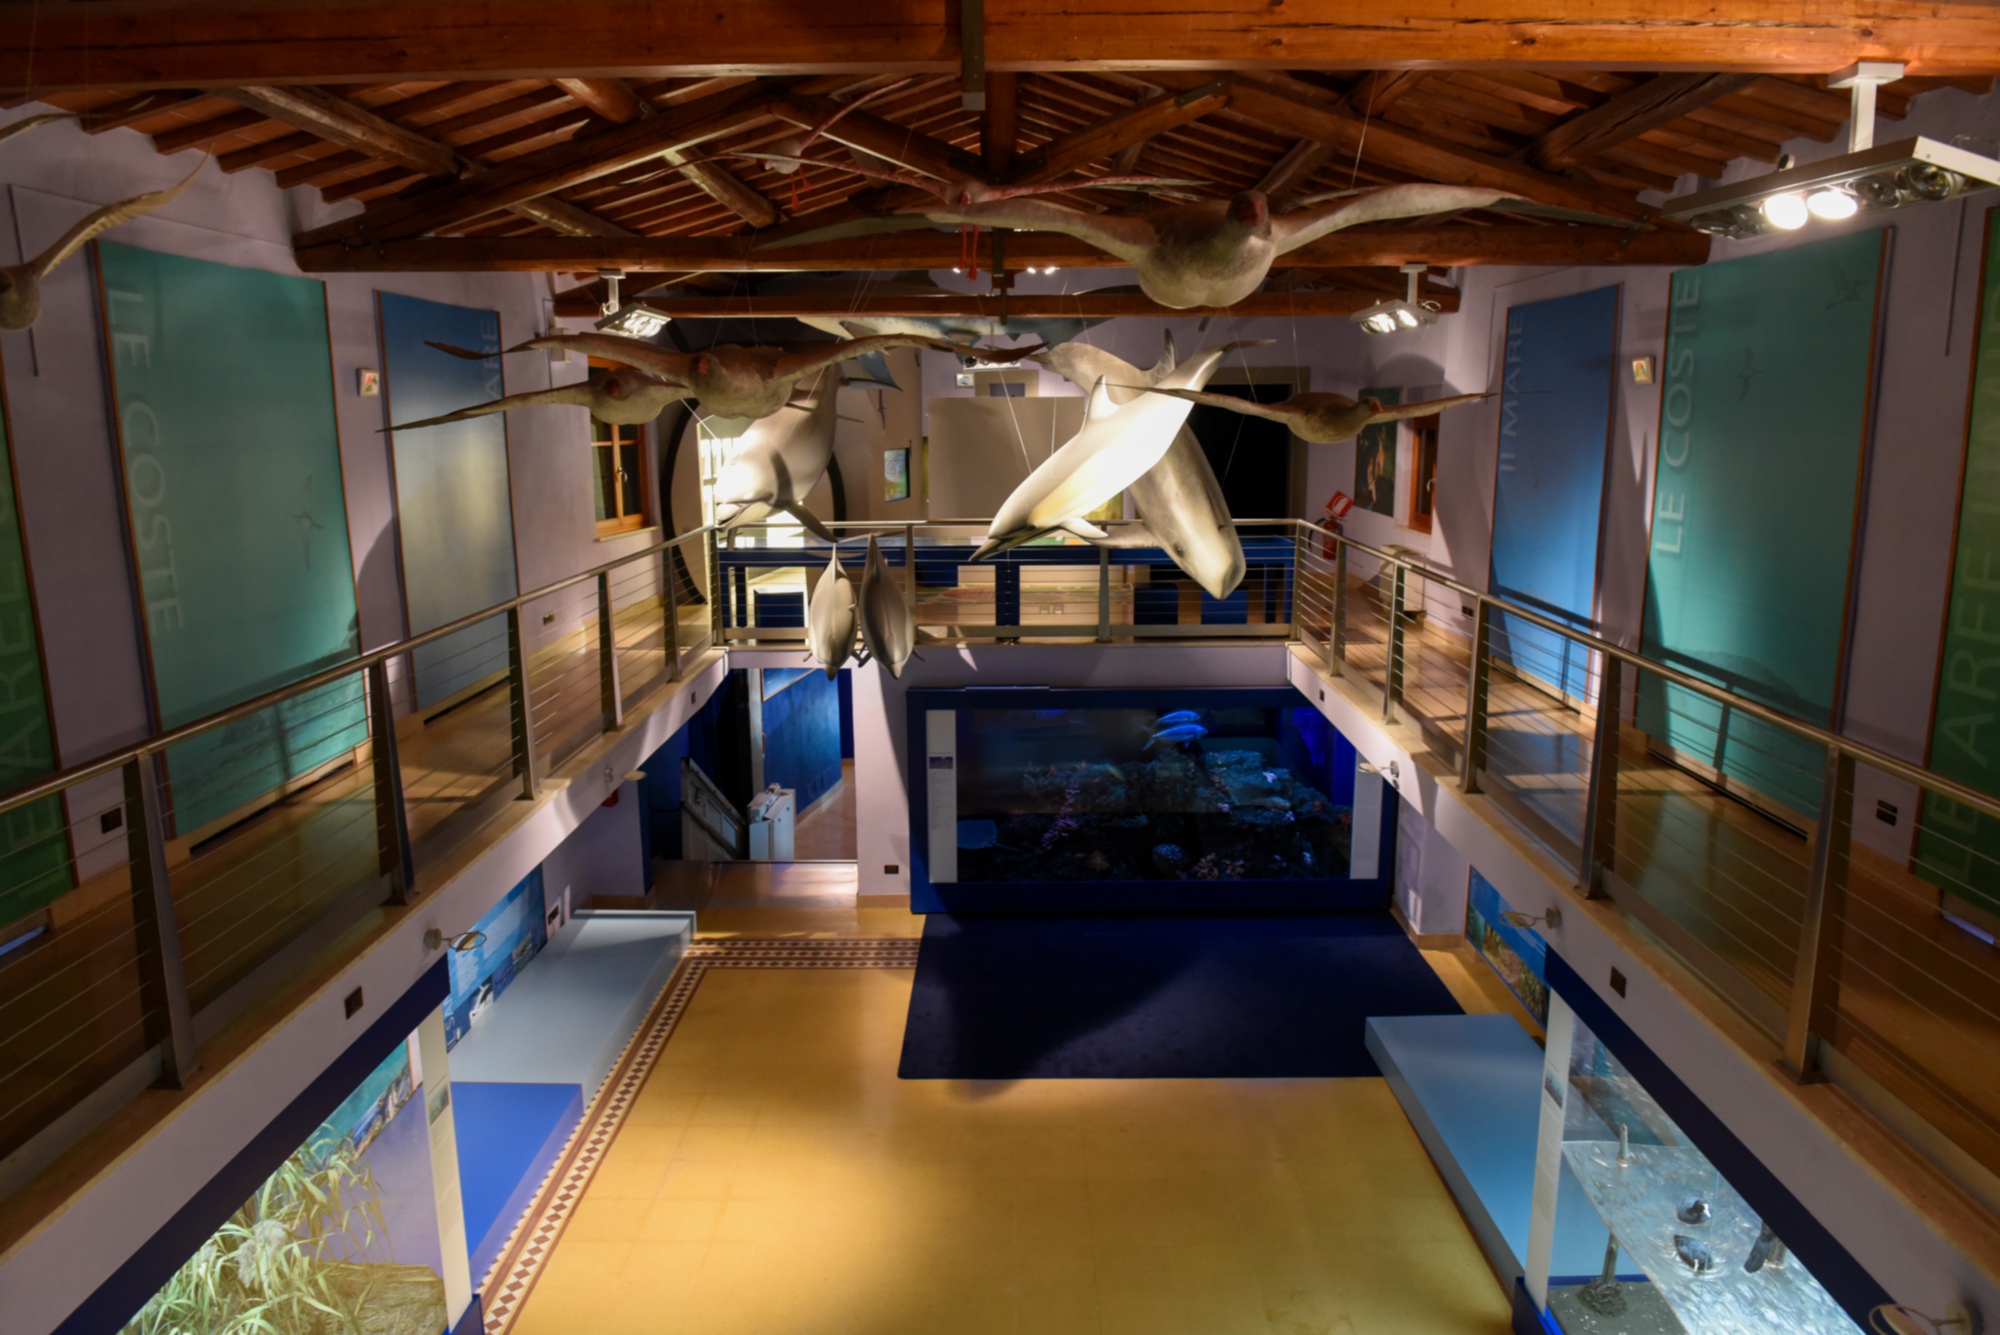 Natural History Museum of the Maremma